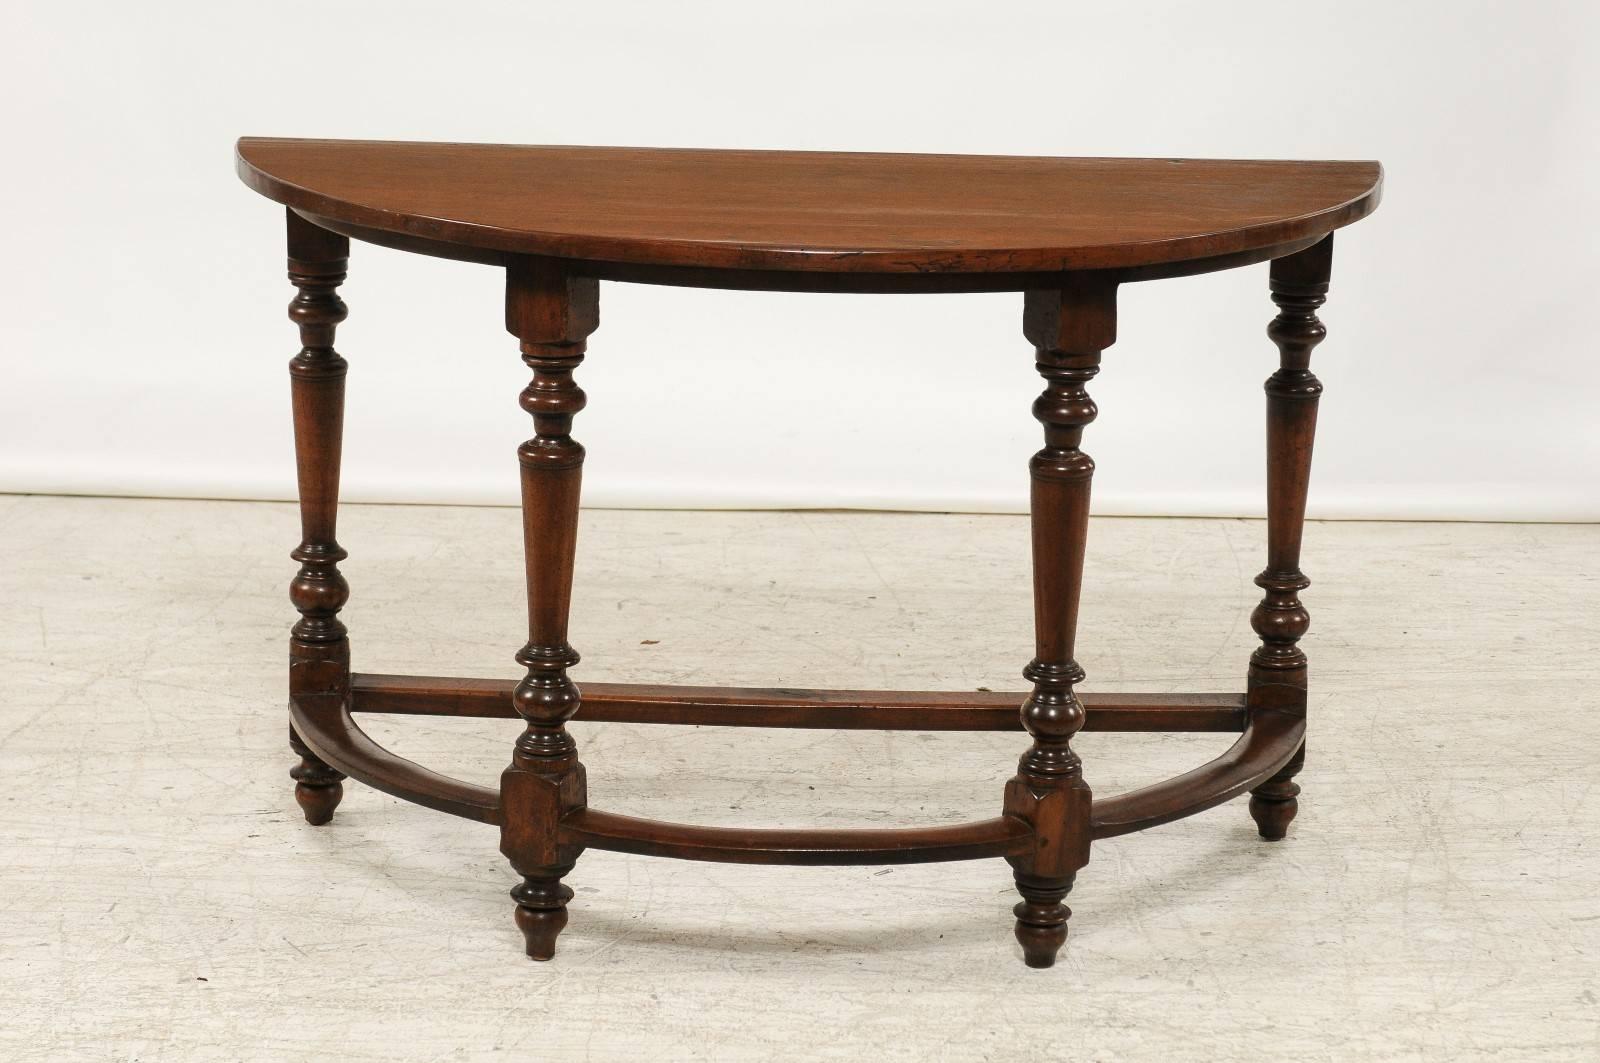 A pair of Italian walnut demilune console tables with turned legs and side stretchers from the early 19th century. Each of this pair of Italian demilunes features a semi-circular top, sitting above four elegantly turned legs with square block